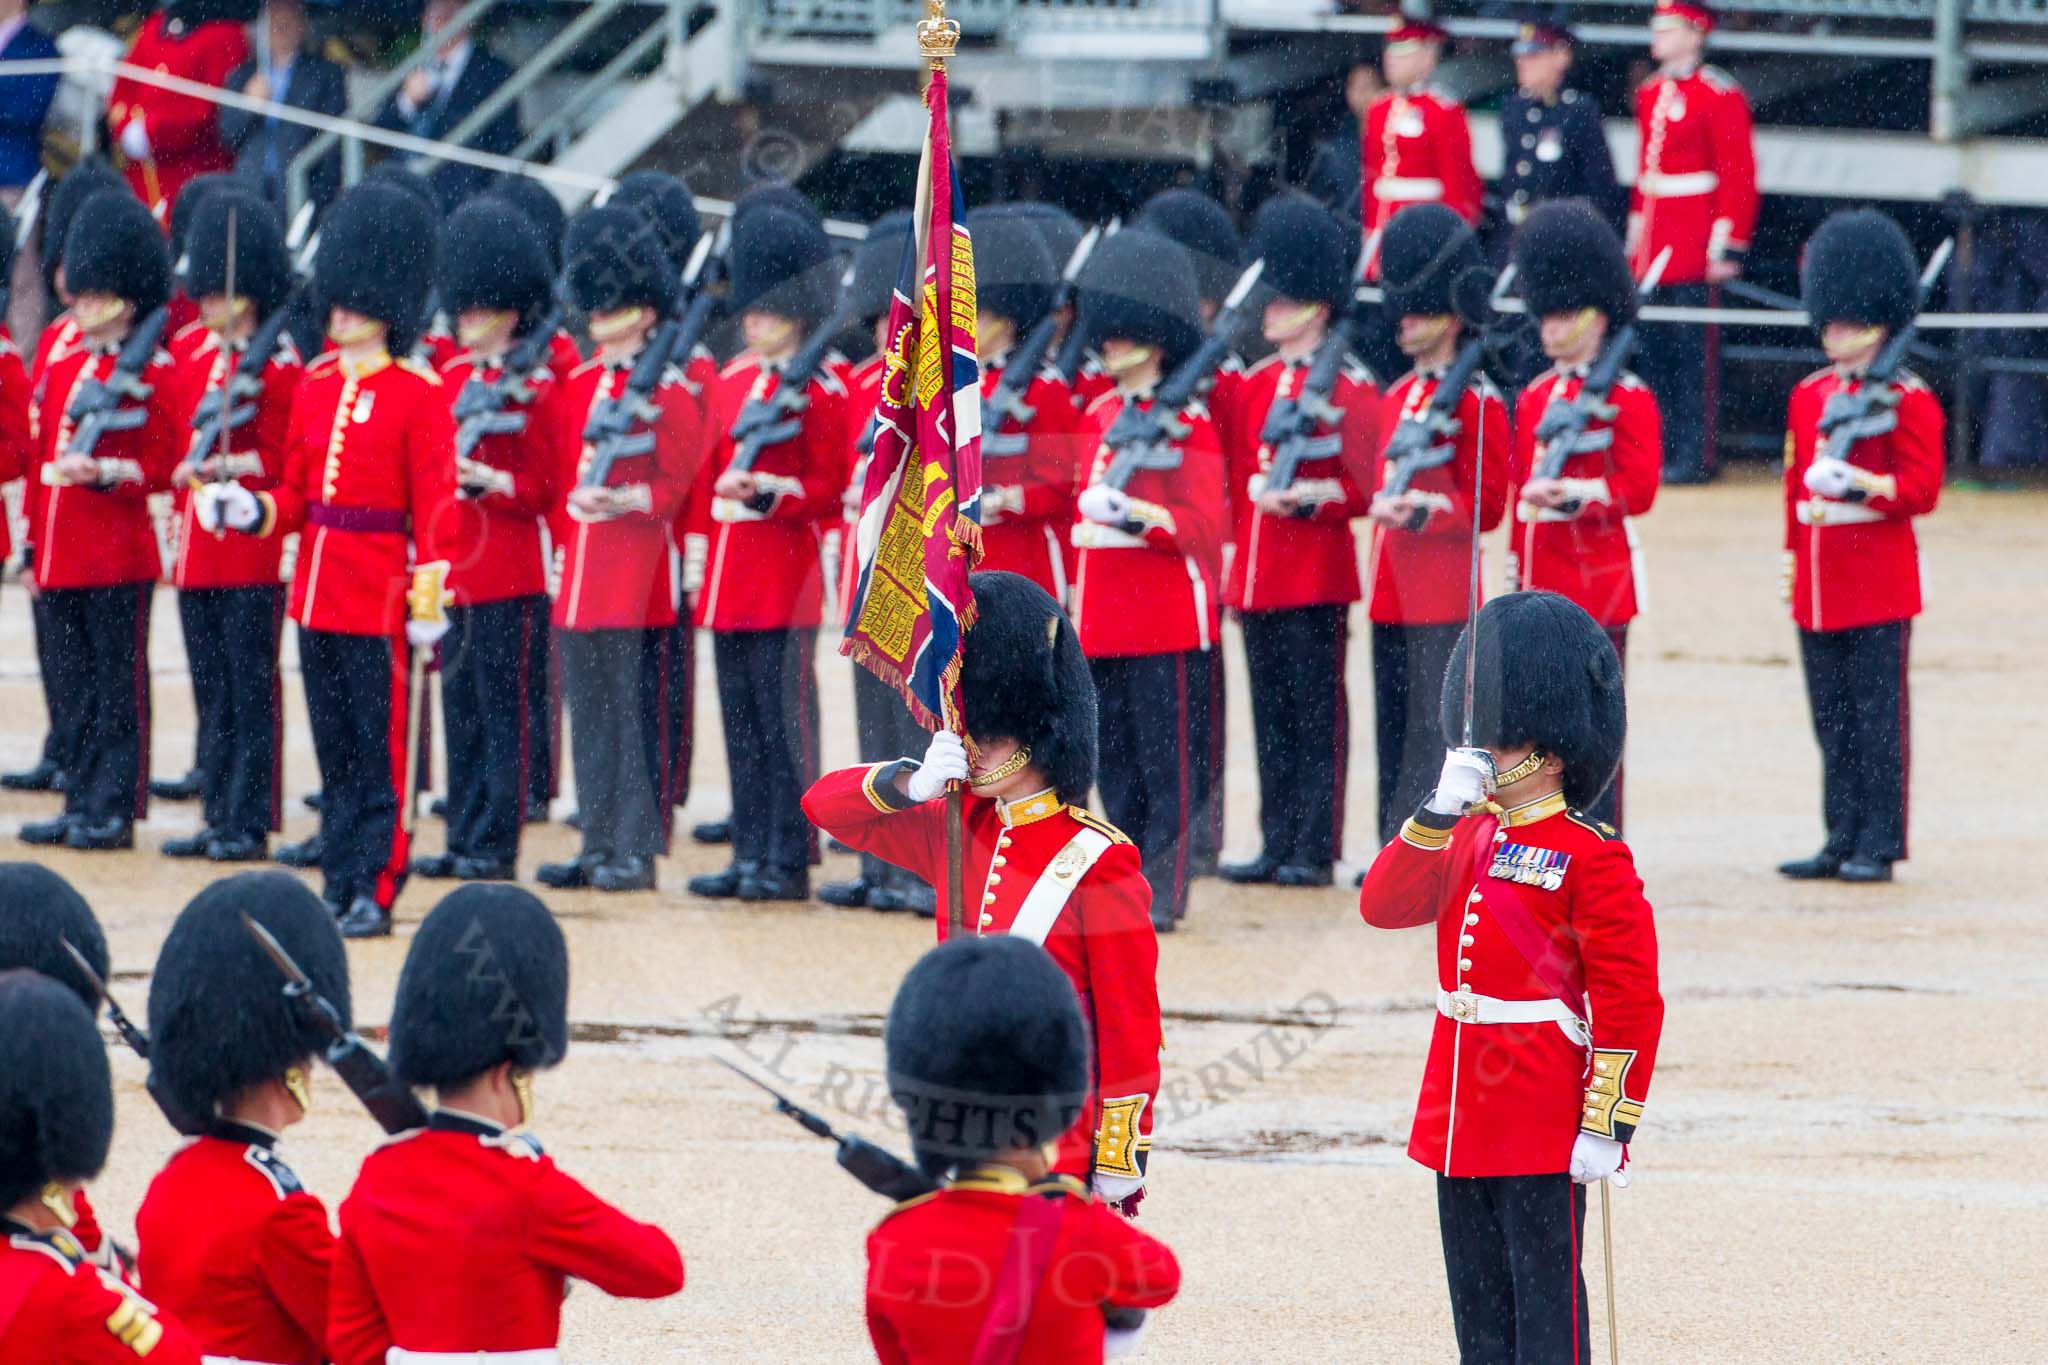 The Colonel's Review 2014.
Horse Guards Parade, Westminster,
London,

United Kingdom,
on 07 June 2014 at 11:20, image #405